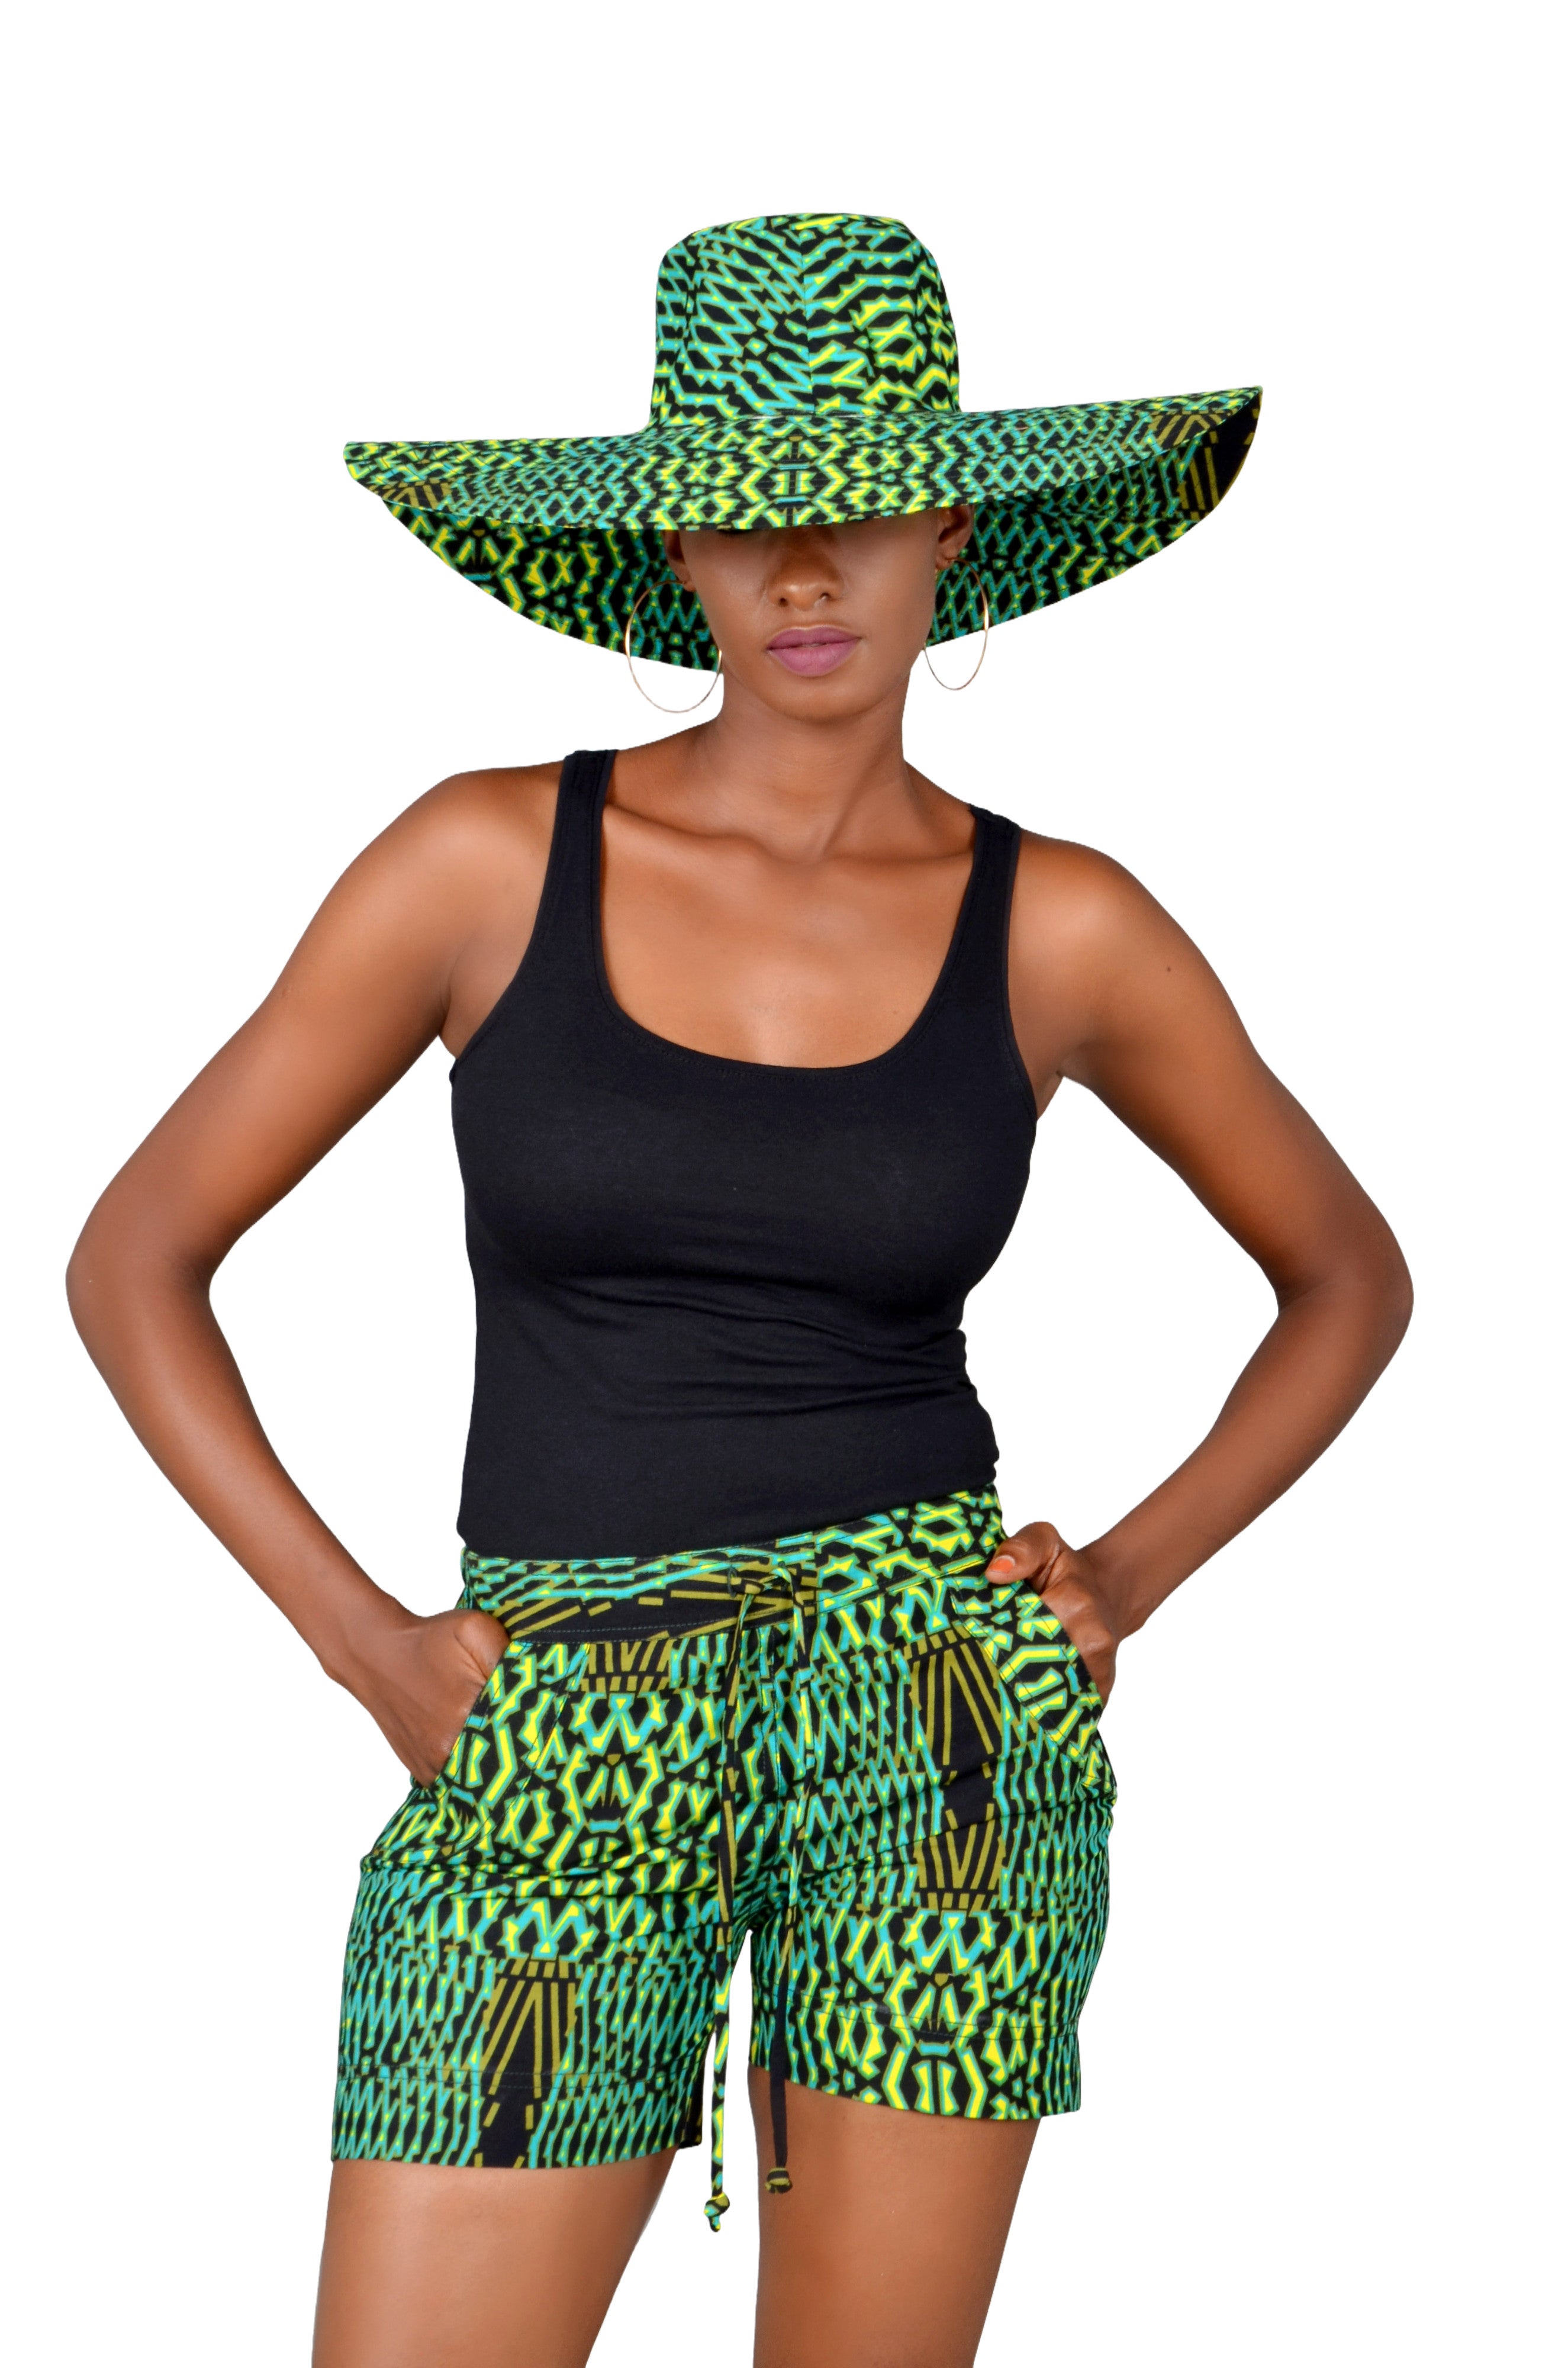 Jollo Ccm Modern African Hat: let comfort and style give you the best shade.